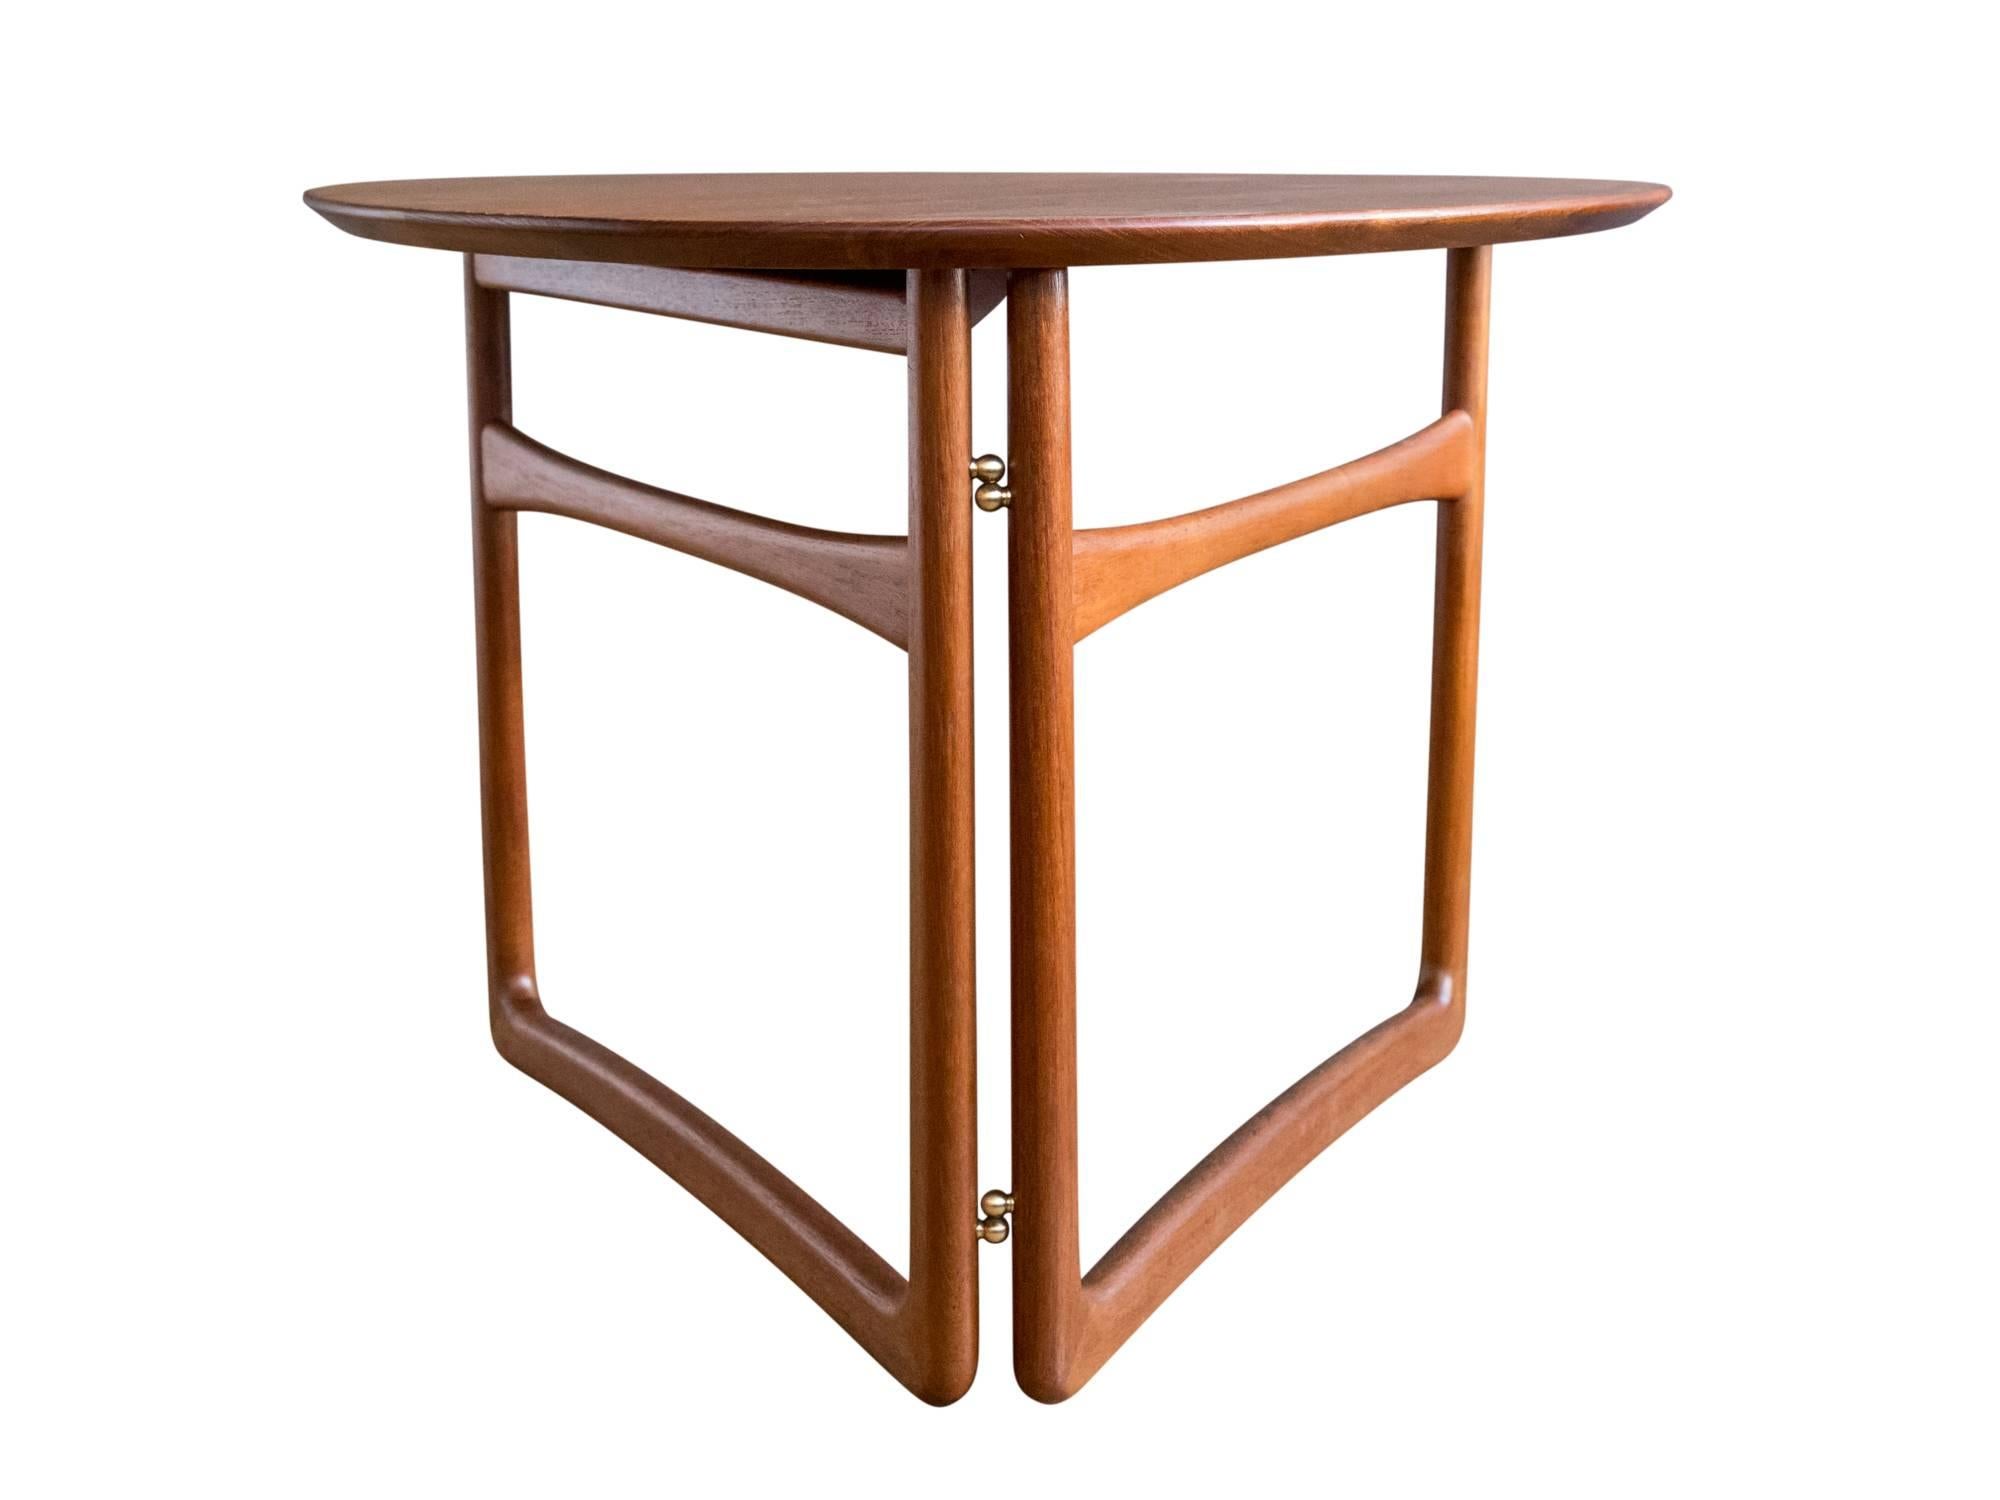 A model FD 18/57 teak folding or side table designed by Peter Hvidt and Orla Mølgaard-Nielsen for France & Daverkosen, circa 1950s. Featuring a triangular teak top with beveled edge and rounded corners supported by a collapsible solid teak sled